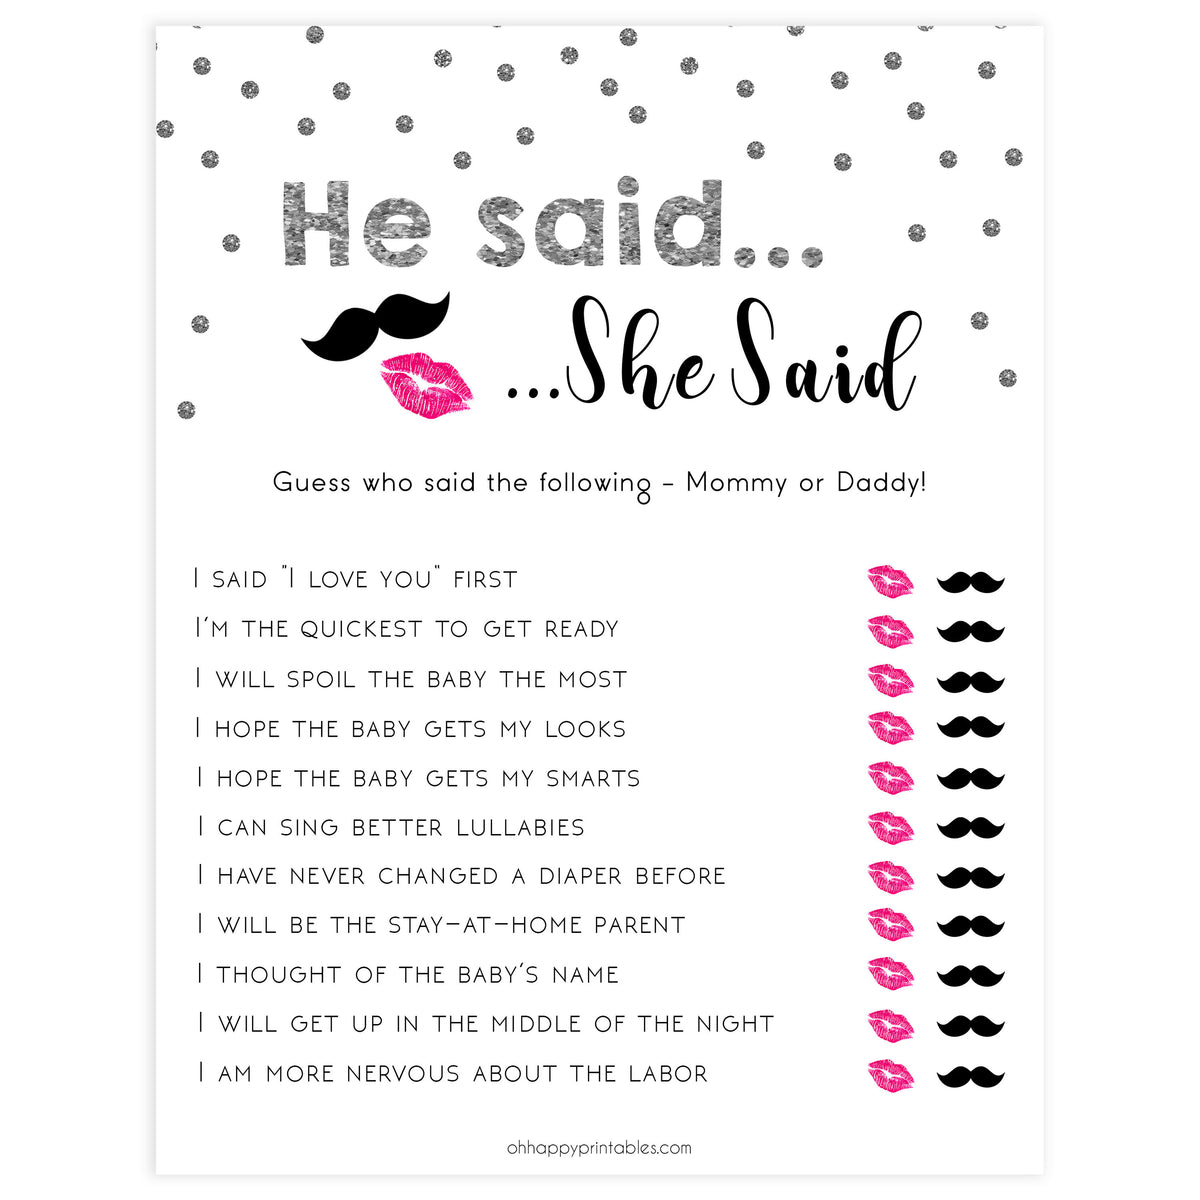 he said she said, mommy daddy guess who game, Printable baby shower games, baby silver glitter fun baby games, baby shower games, fun baby shower ideas, top baby shower ideas, silver glitter shower baby shower, friends baby shower ideas